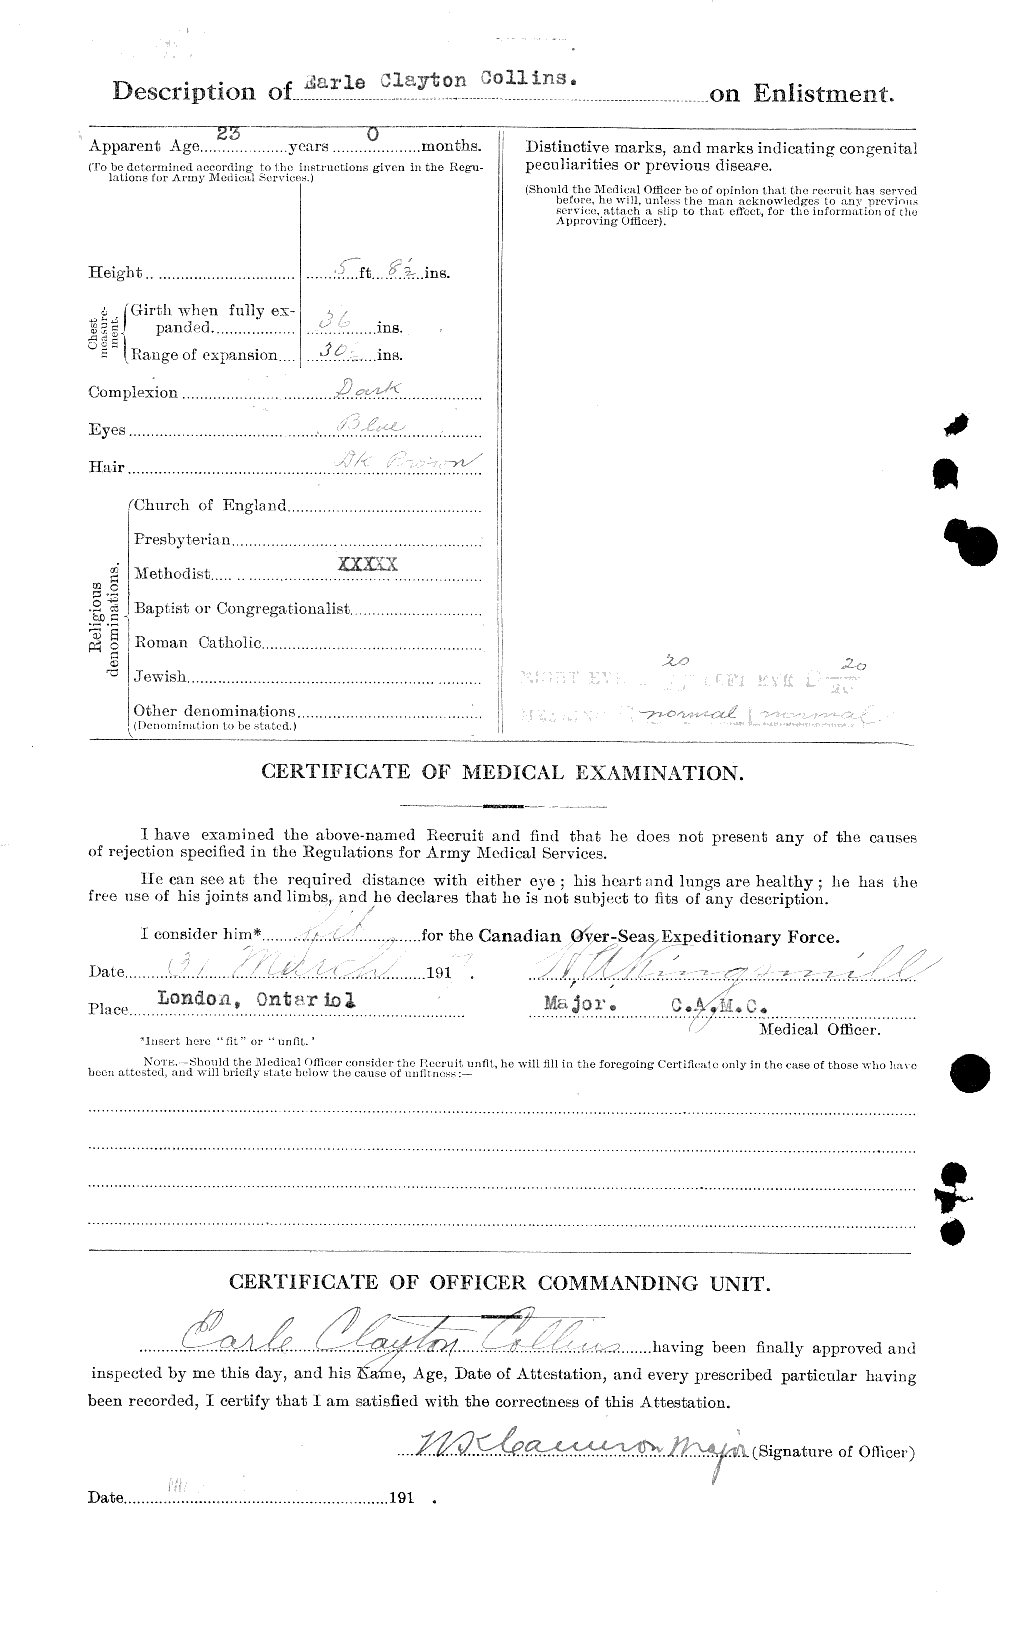 Personnel Records of the First World War - CEF 037729b